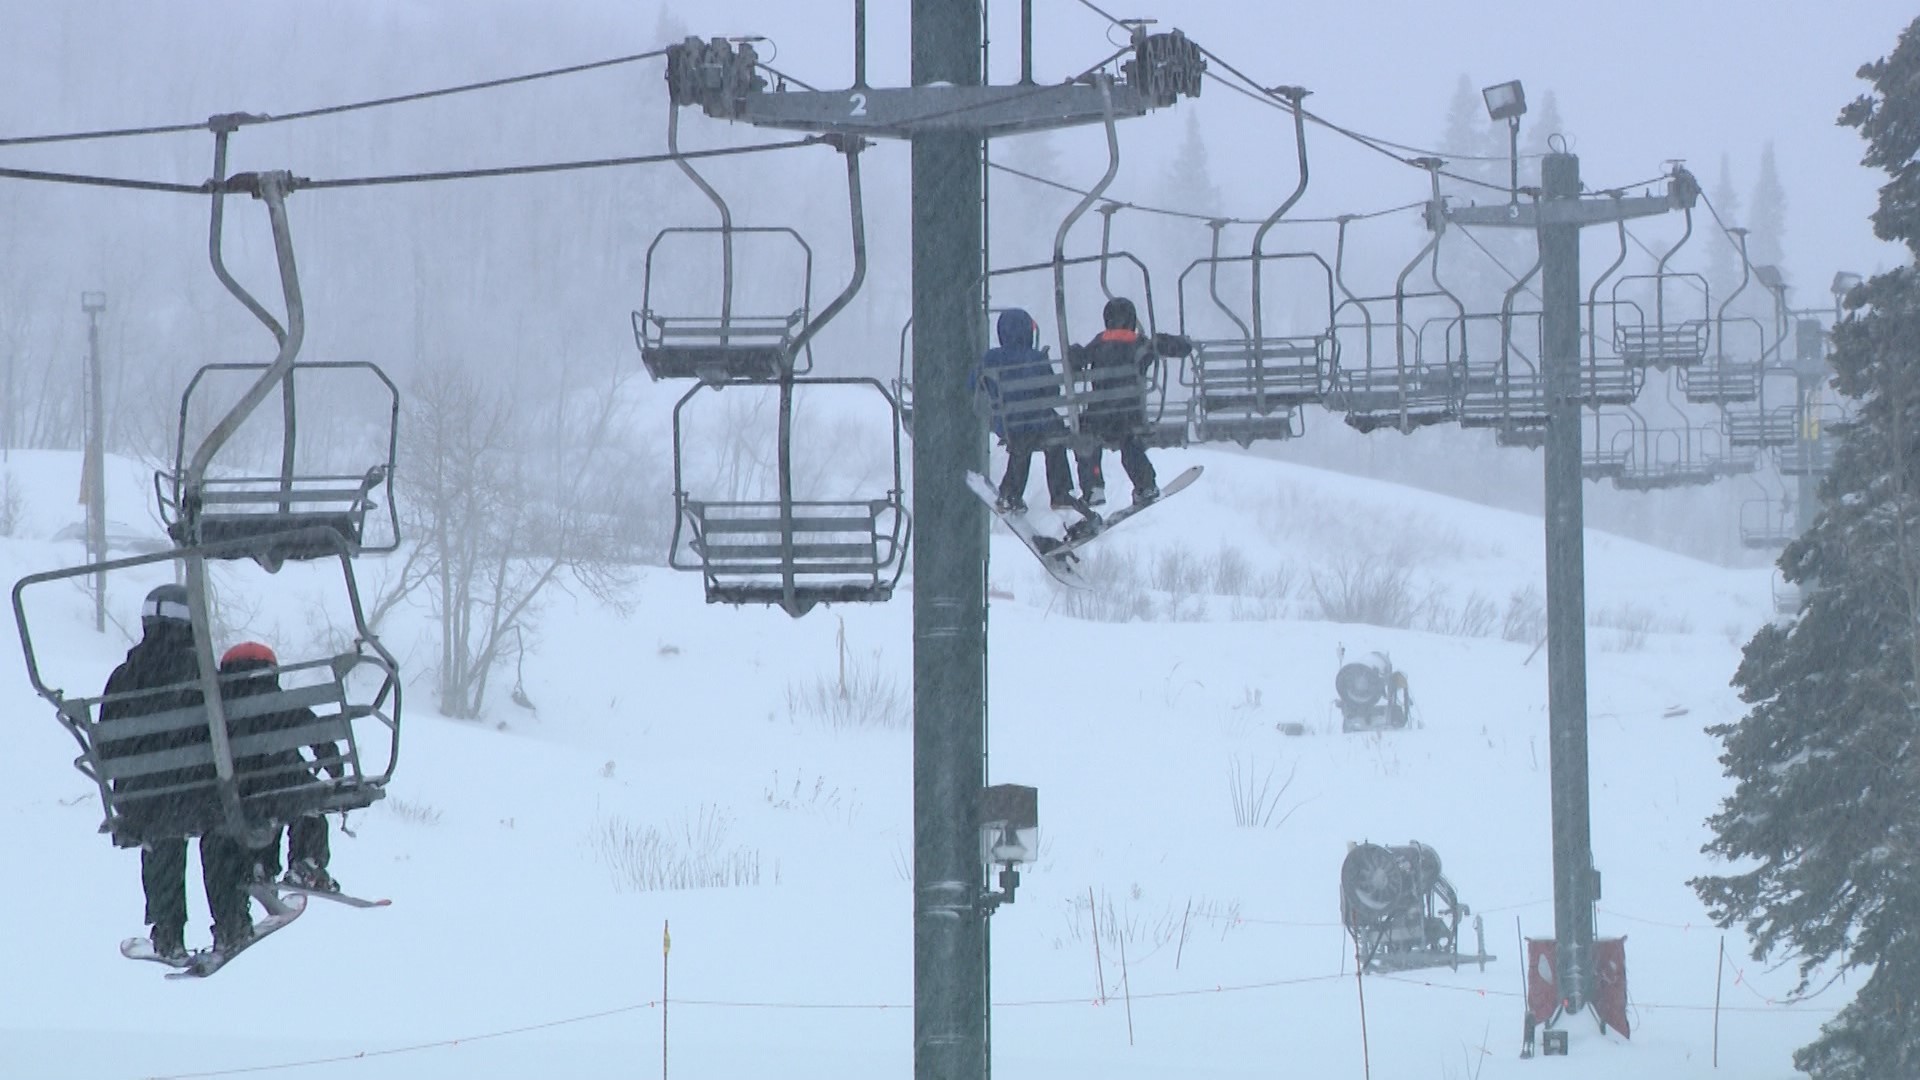 Skiers on the lift at Snowbird on Sunday before it closed for the day. (KSL TV)...